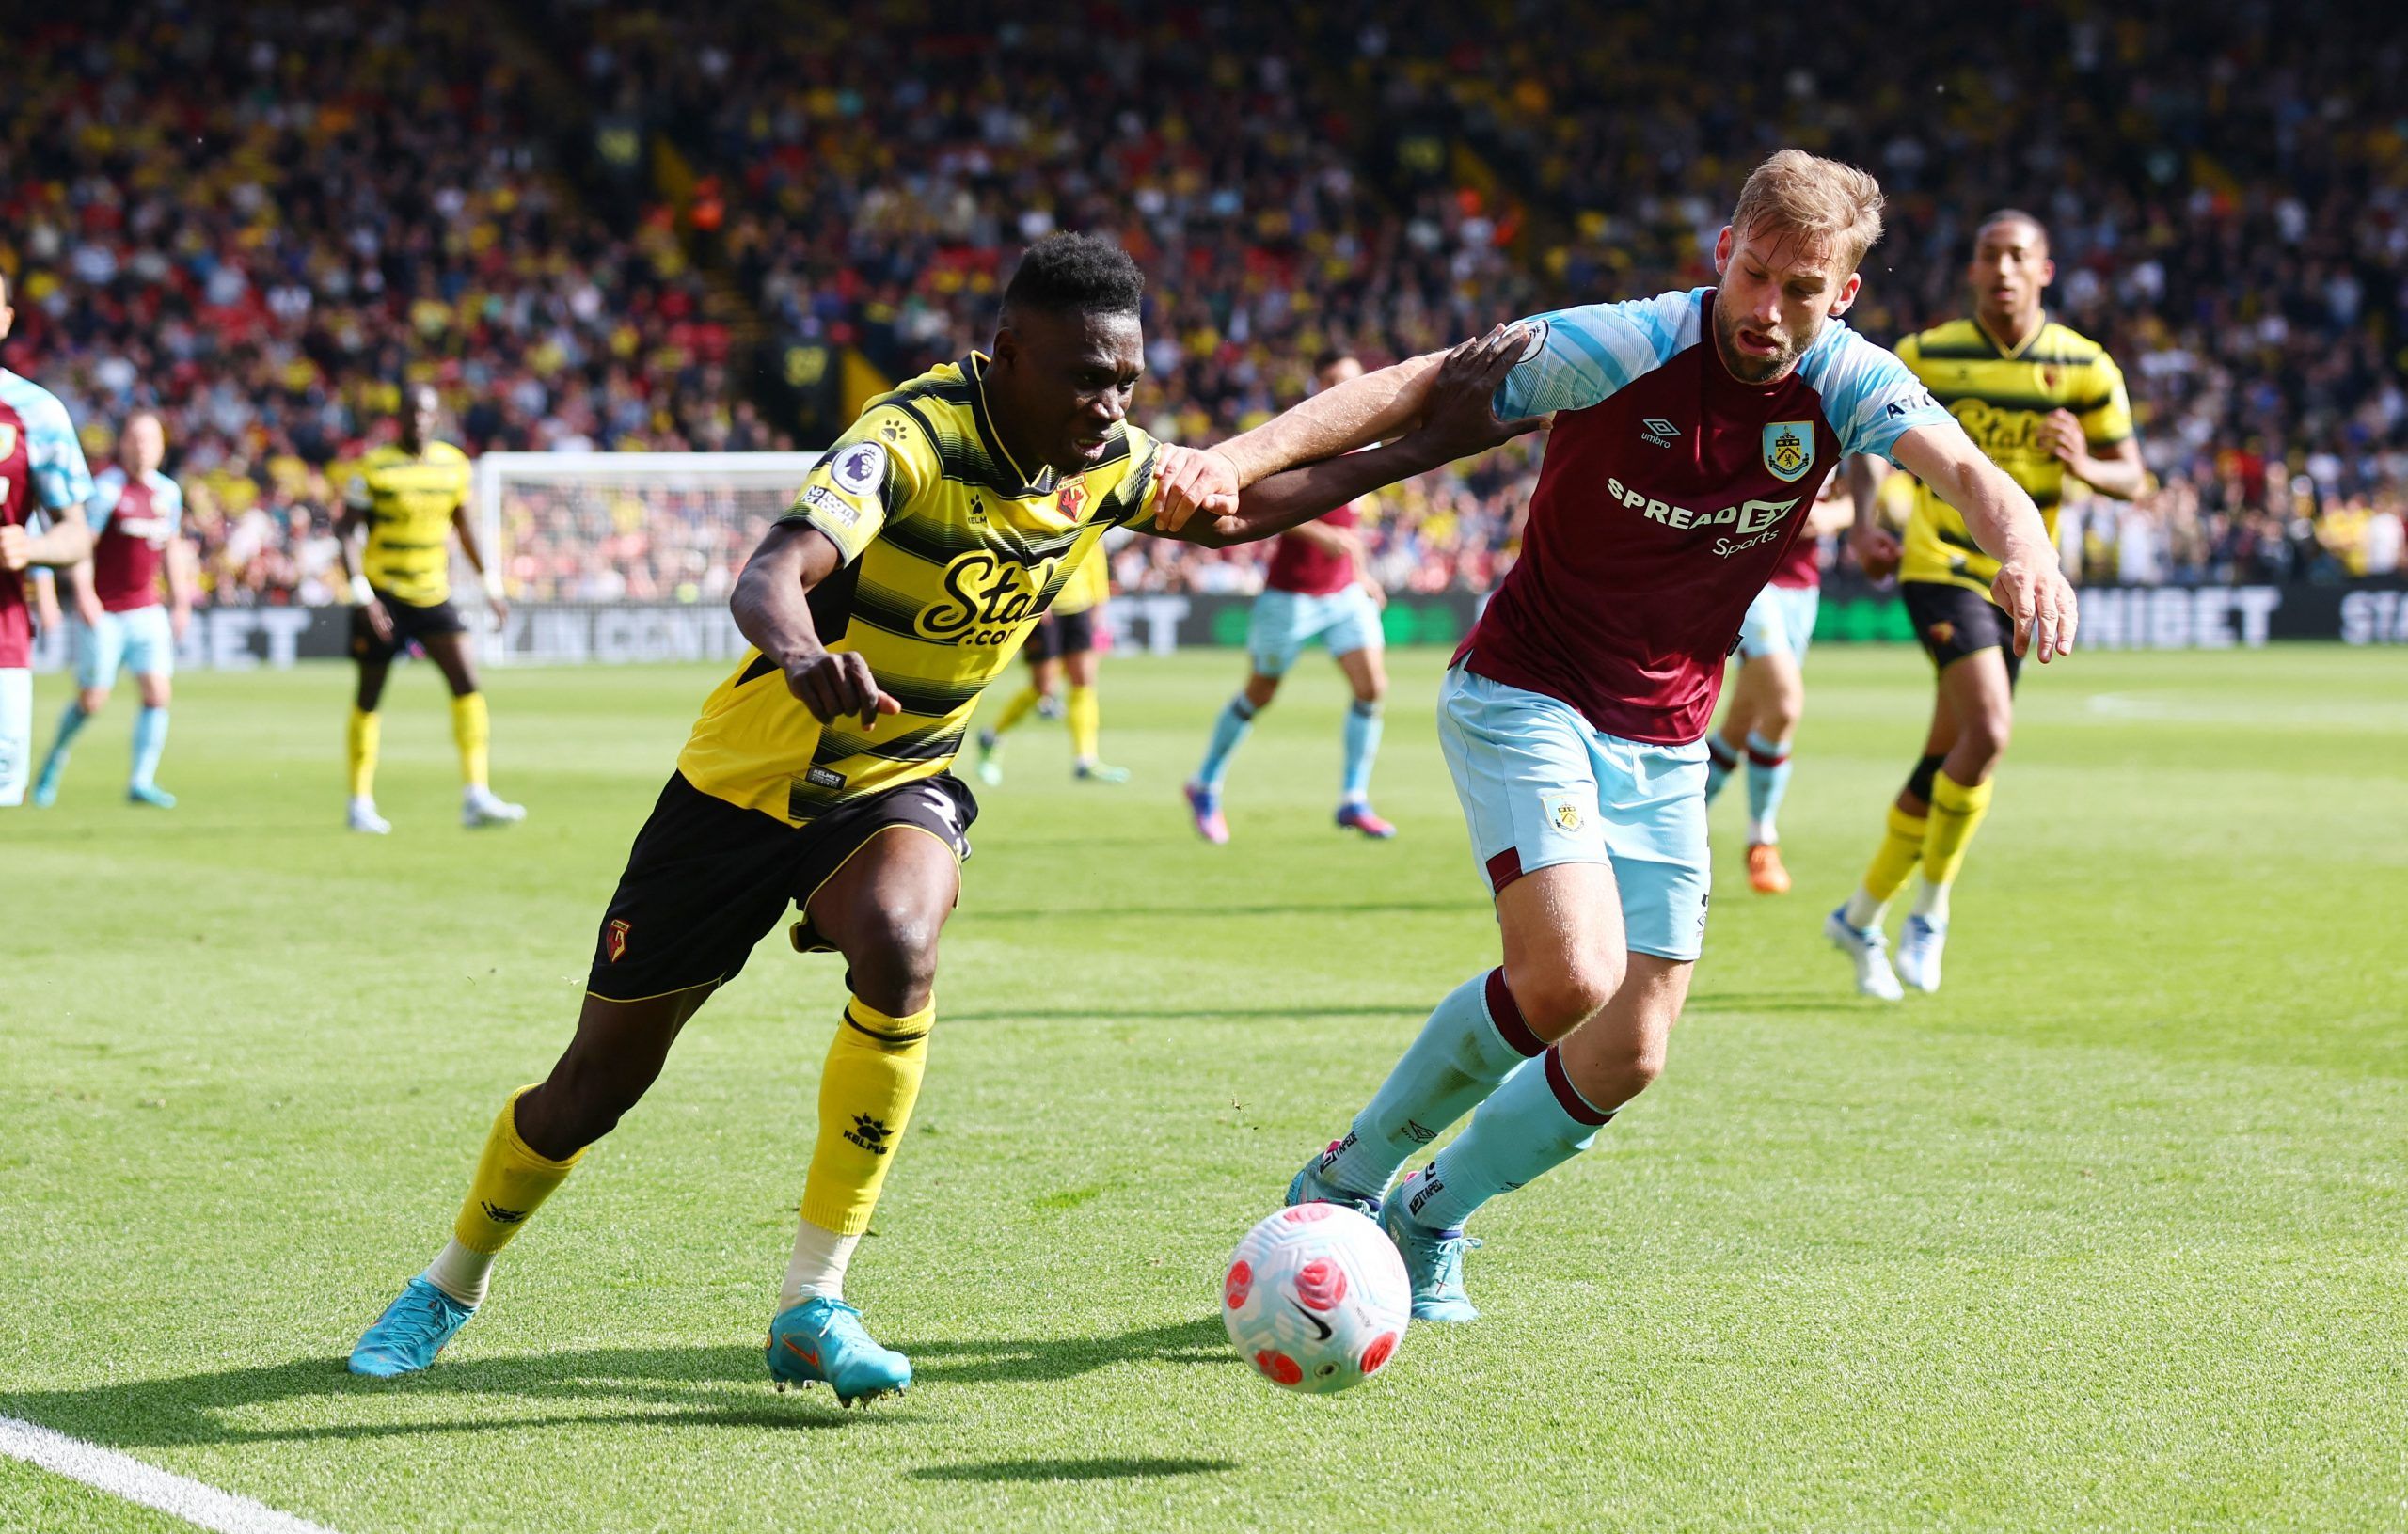 ismaila-sarr-watford-premier-league-crystal-palace-transfer-news-patrick-vieira-signings-latest-benteke-gallagherSoccer Football - Premier League - Watford v Burnley - Vicarage Road, Watford, Britain - April 30, 2022 Watford's Ismaila Sarr in action with Burnley's Charlie Taylor REUTERS/David Klein EDITORIAL USE ONLY. No use with unauthorized audio, video, data, fixture lists, club/league logos or 'live' services. Online in-match use limited to 75 images, no video emulation. No use in betting, g